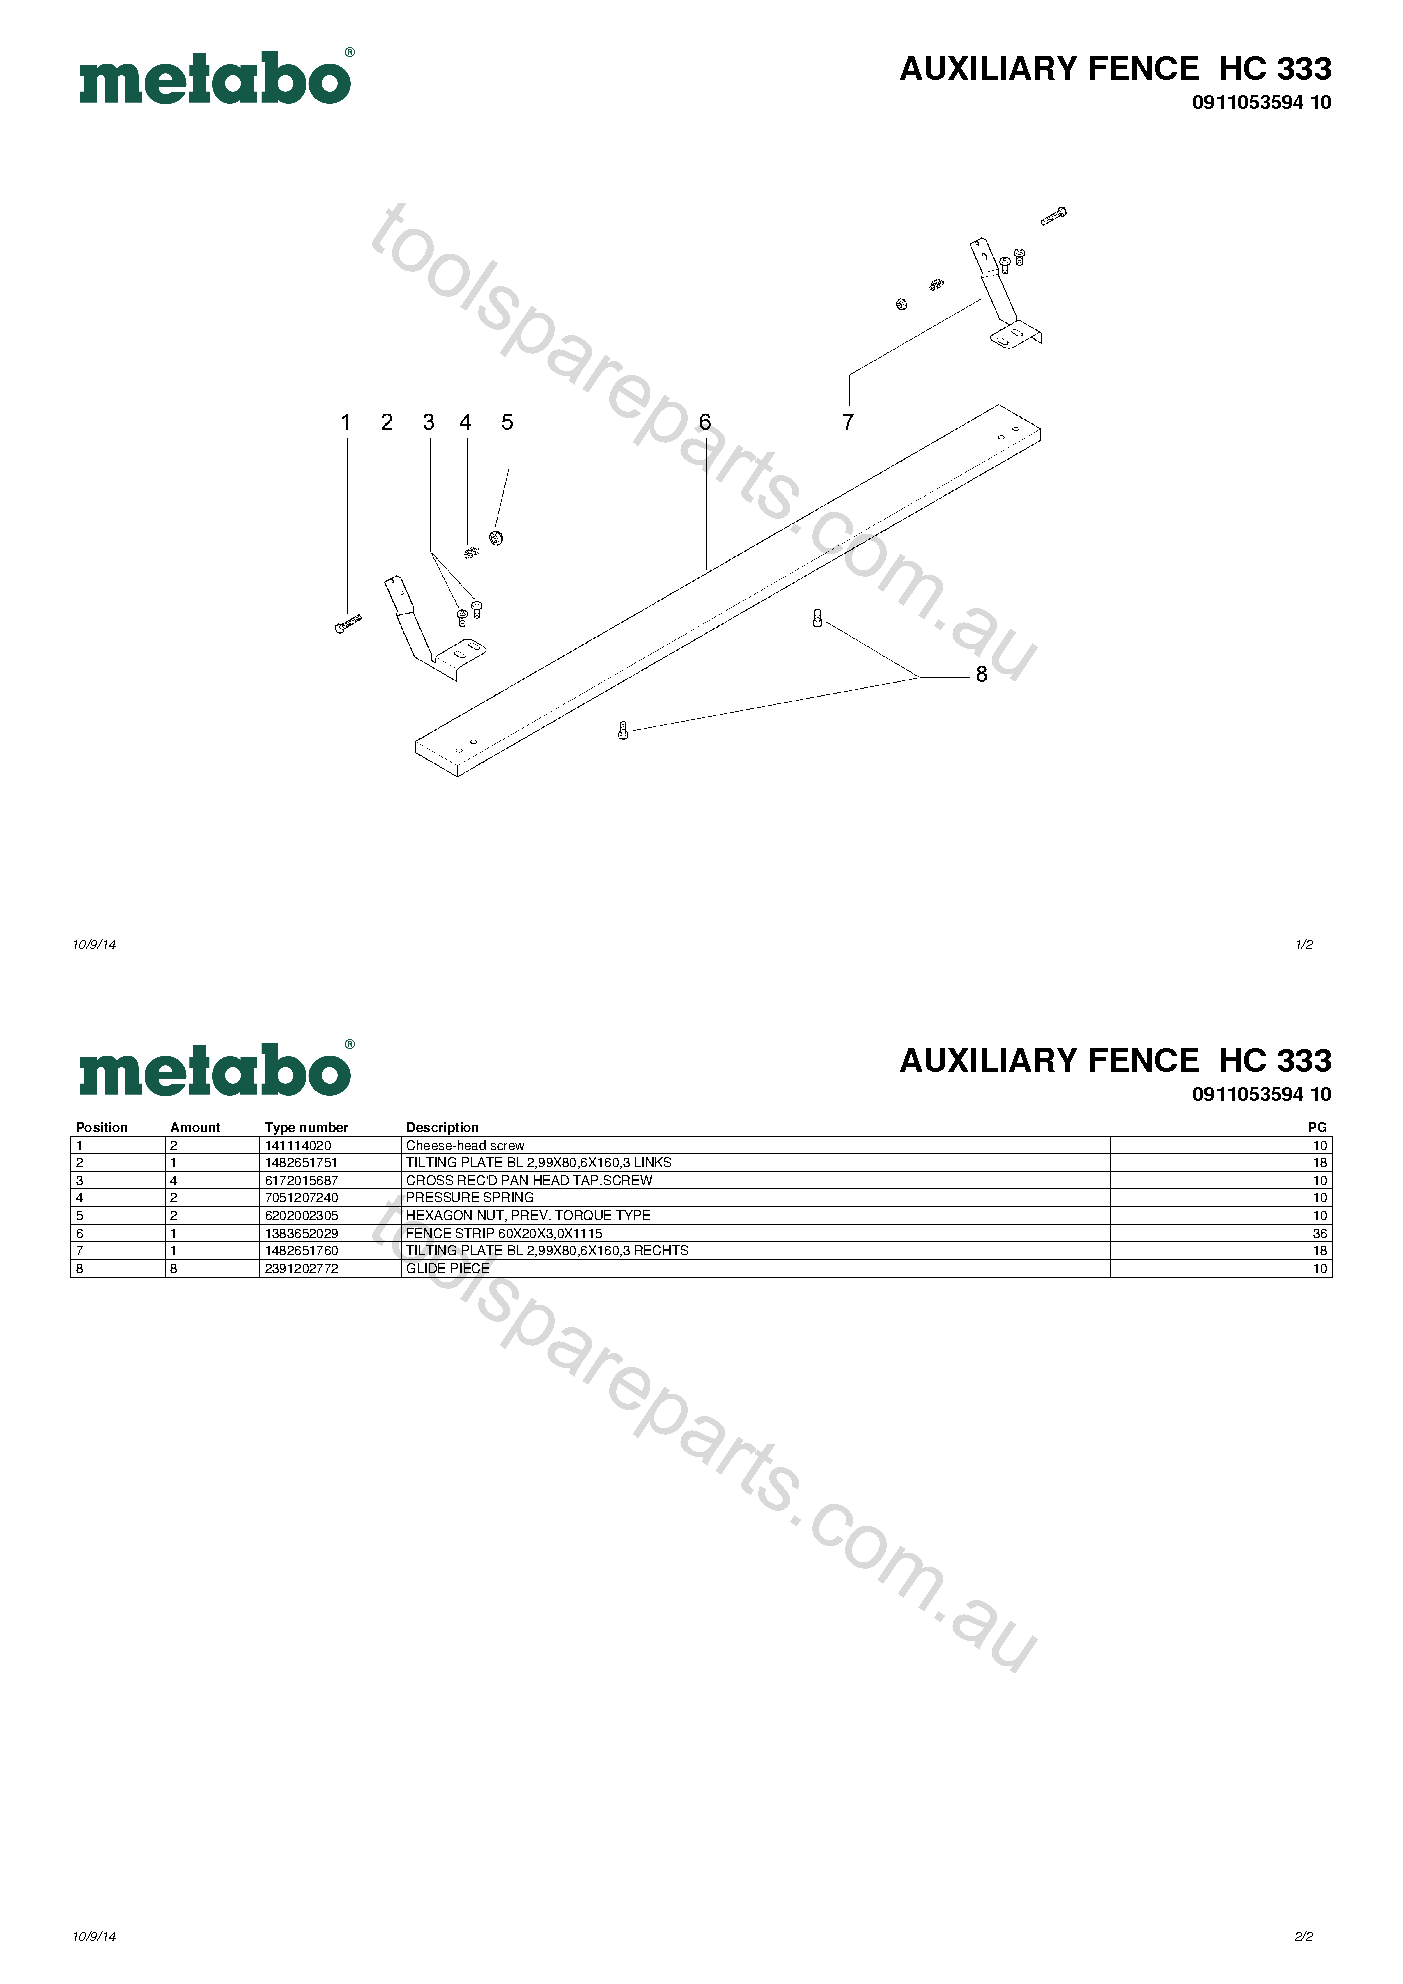 Metabo AUXILIARY FENCE HC 333 0911053594 10  Diagram 1